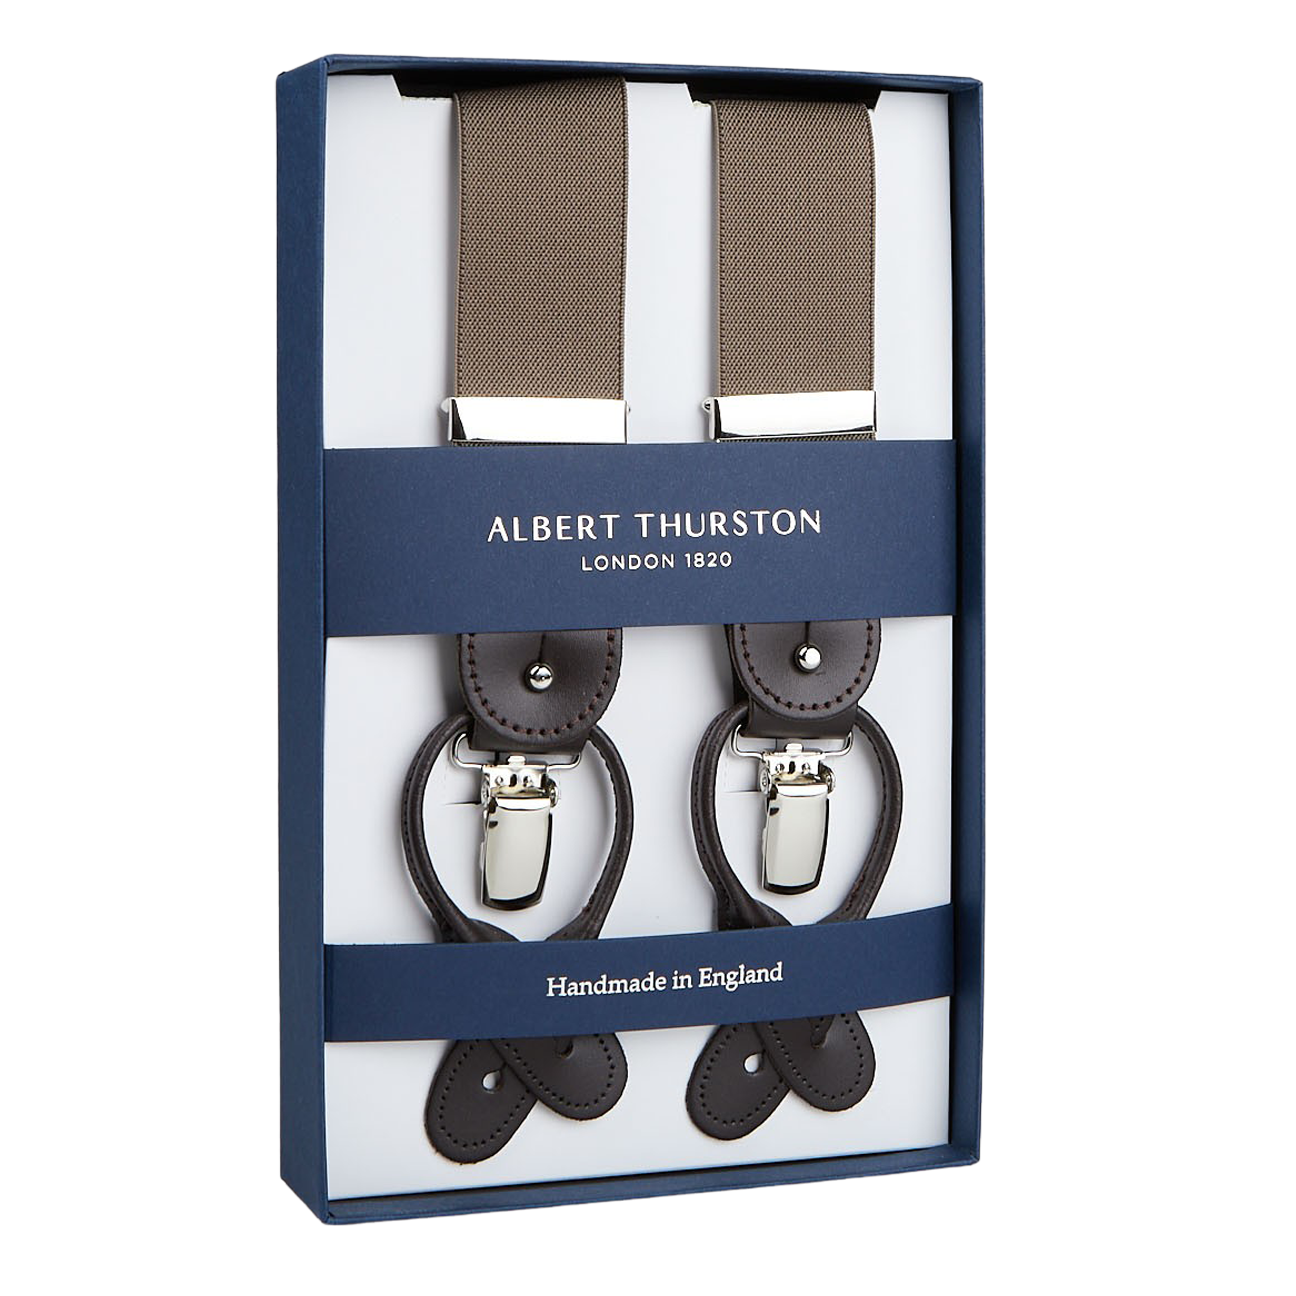 Pair of handmade Albert Thurston Nougat Brown Nylon Elastic 35mm Braces with brown leather details, presented in a gift box.